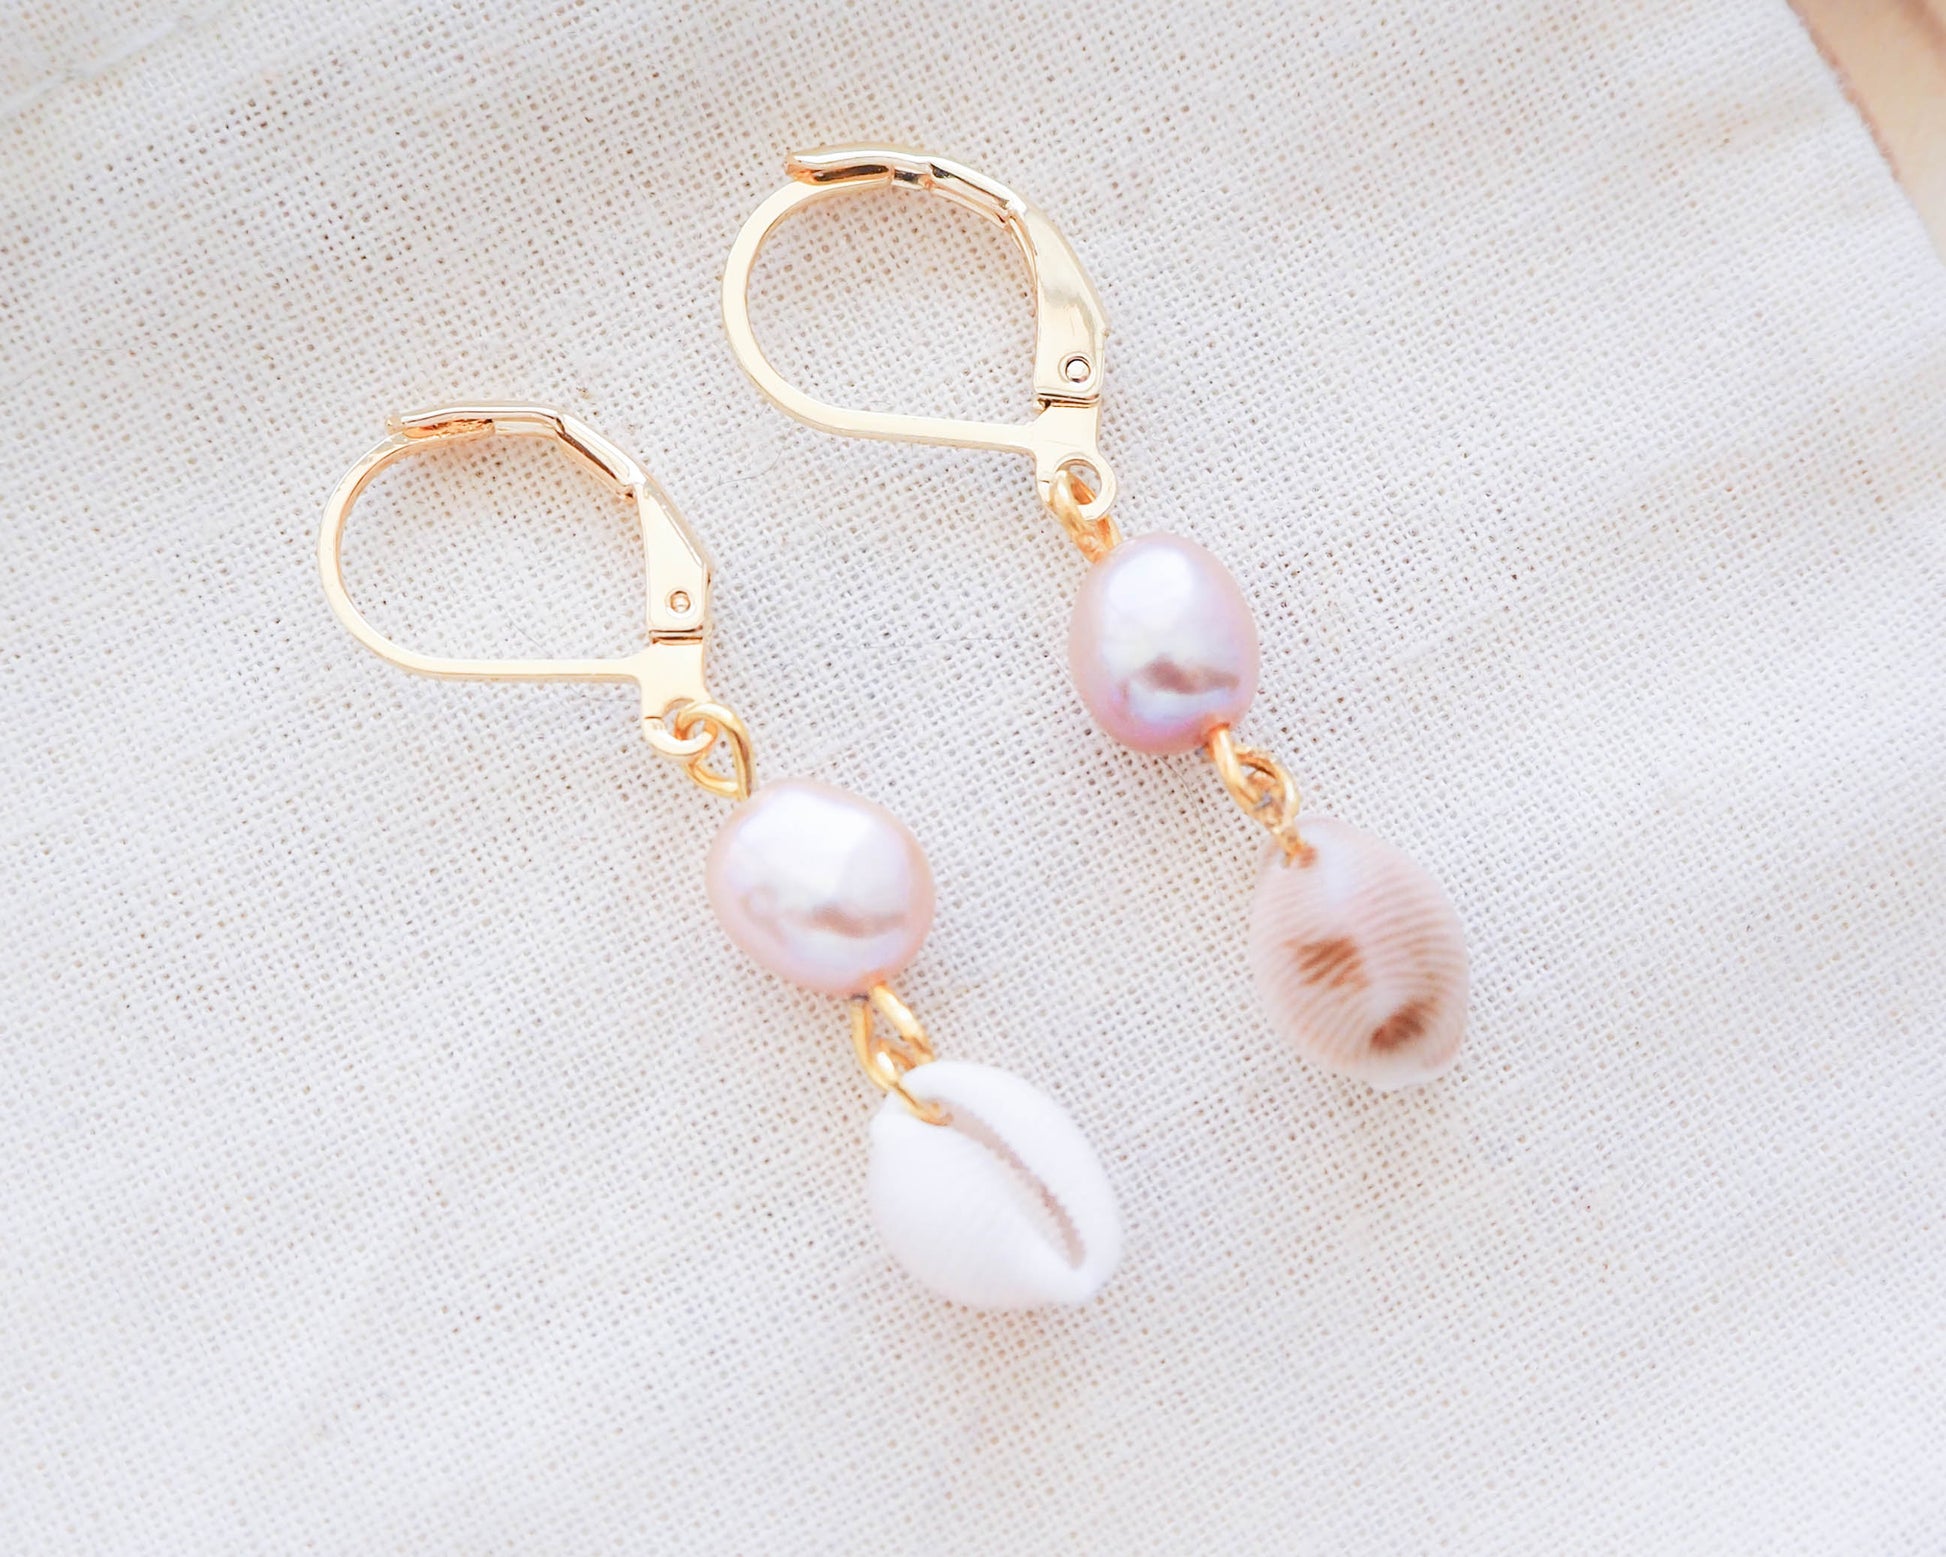 Close up of 24K Gold Plated Portuguese Cowrie Seashell Earrings with Rose Freshwater Pearls, Wedding Shell Earrings